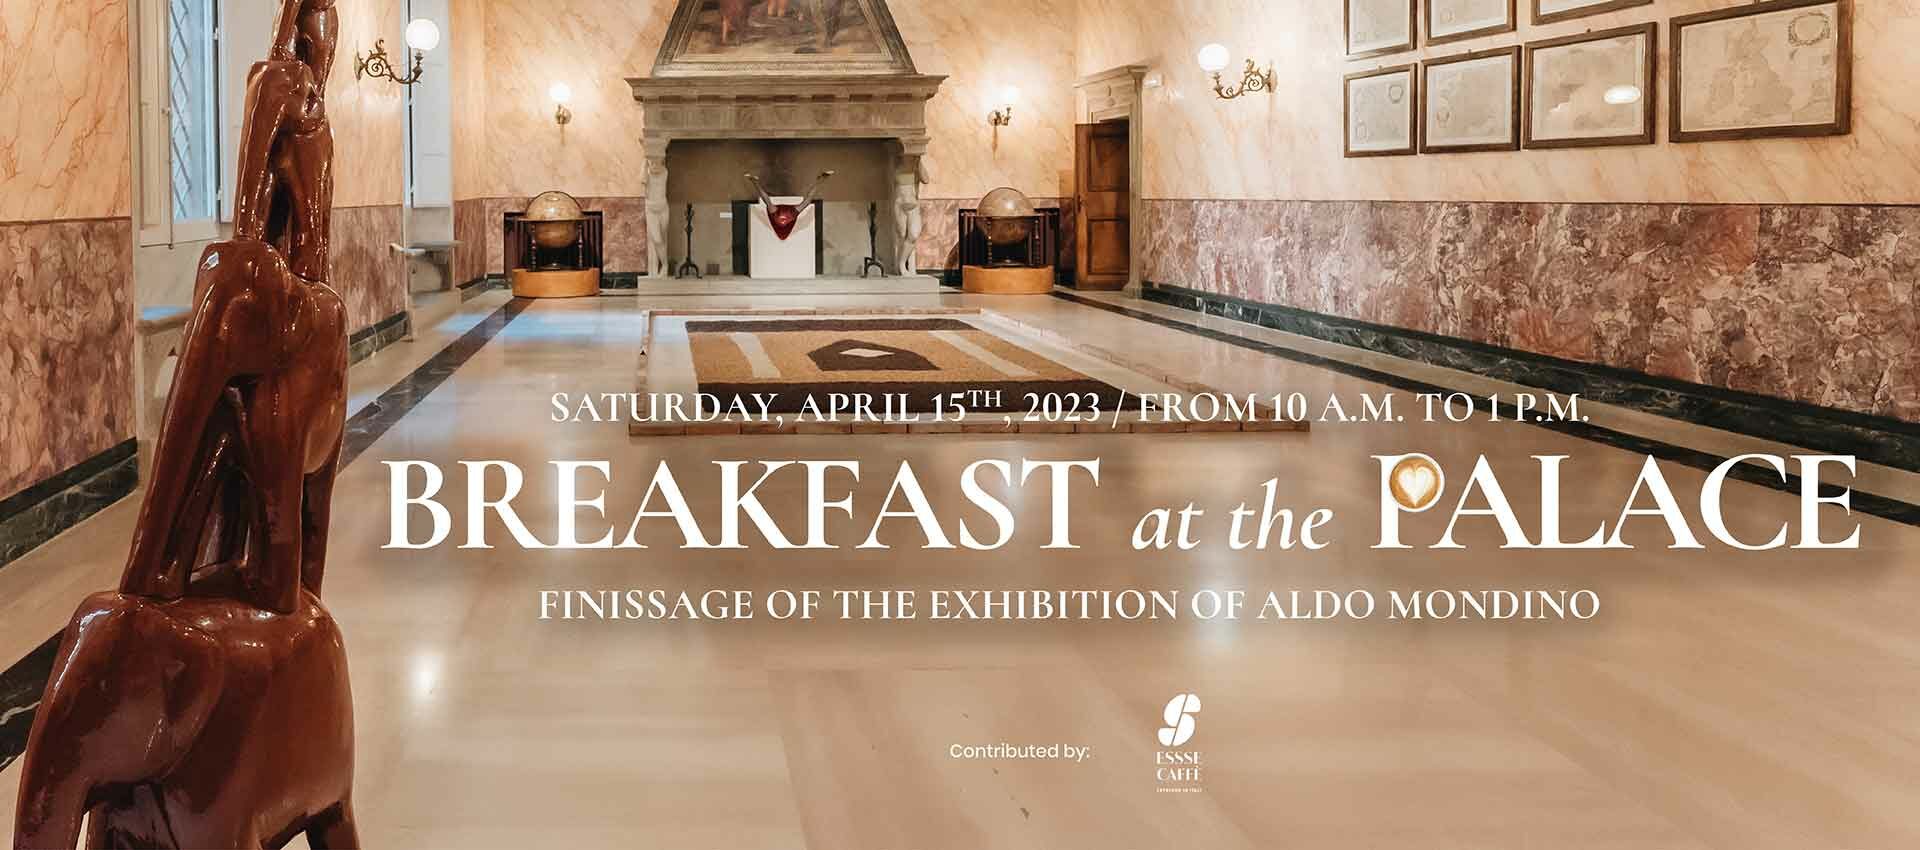 <p>Saturday, April 15, 2023, from 10 a.m. to 1 p.m.</p>
<h2>Breakfast at the Palace</h2>
<h3>Come and <em>taste</em> Aldo Mondino&#8217;s exhibition. </h3>
